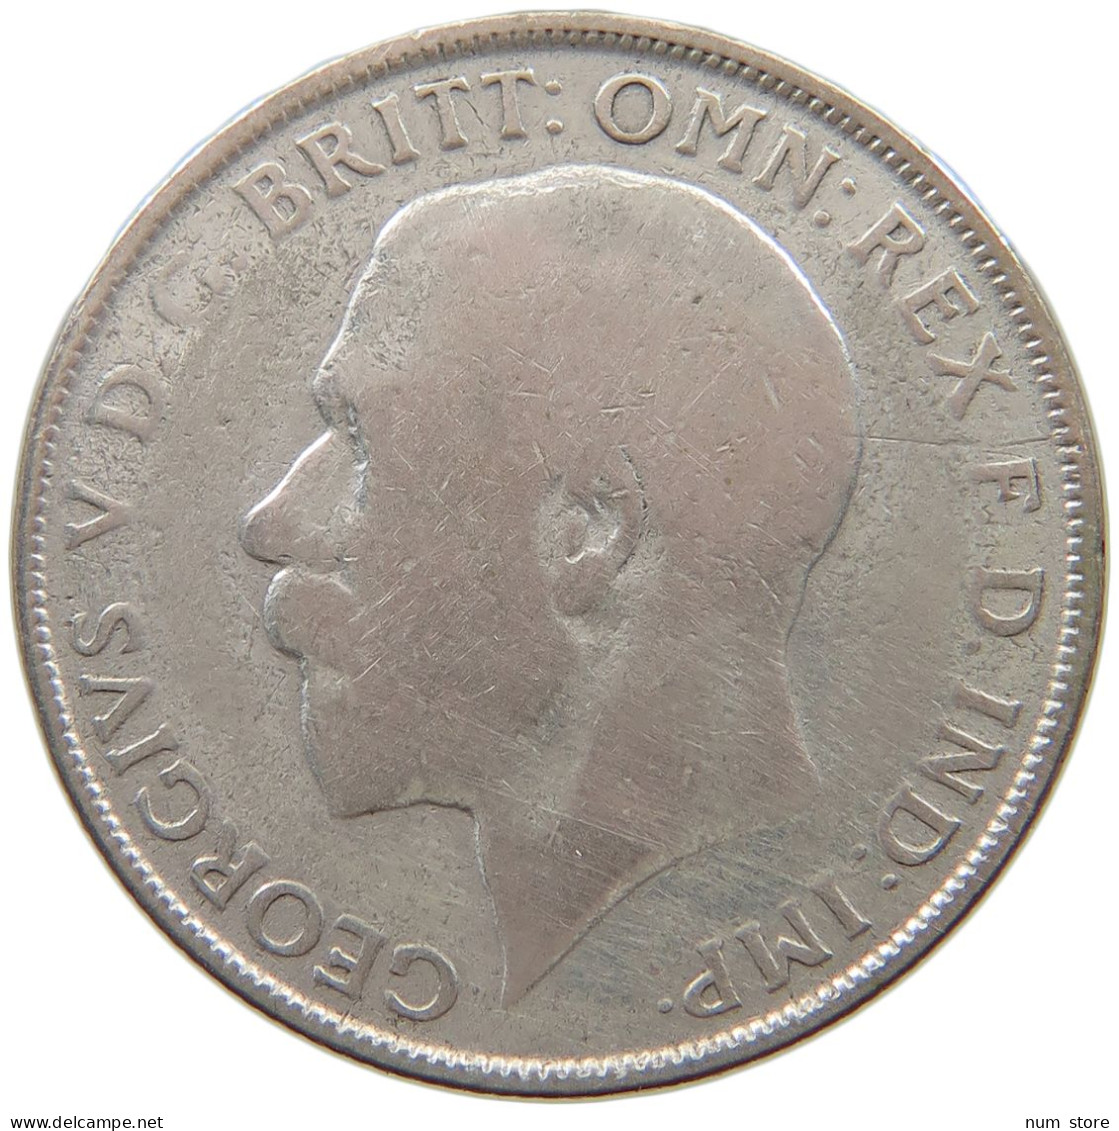 GREAT BRITAIN FLORIN 1923 George V. (1910-1936) #a068 0717 - J. 1 Florin / 2 Schillings